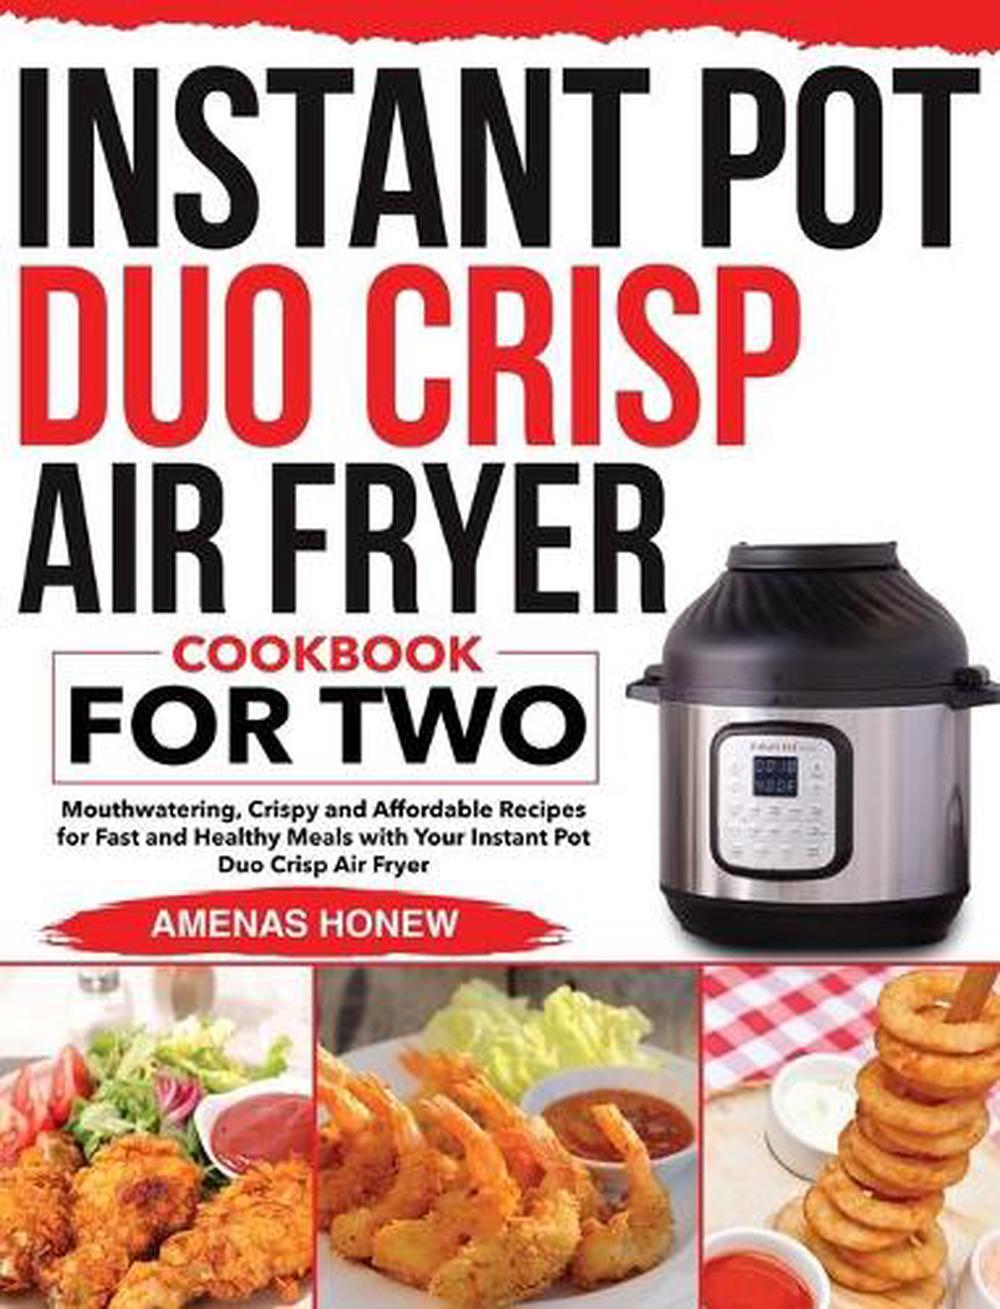 Instant Pot Duo Crisp Air Fryer Cookbook for Two by Amenas Honew ...